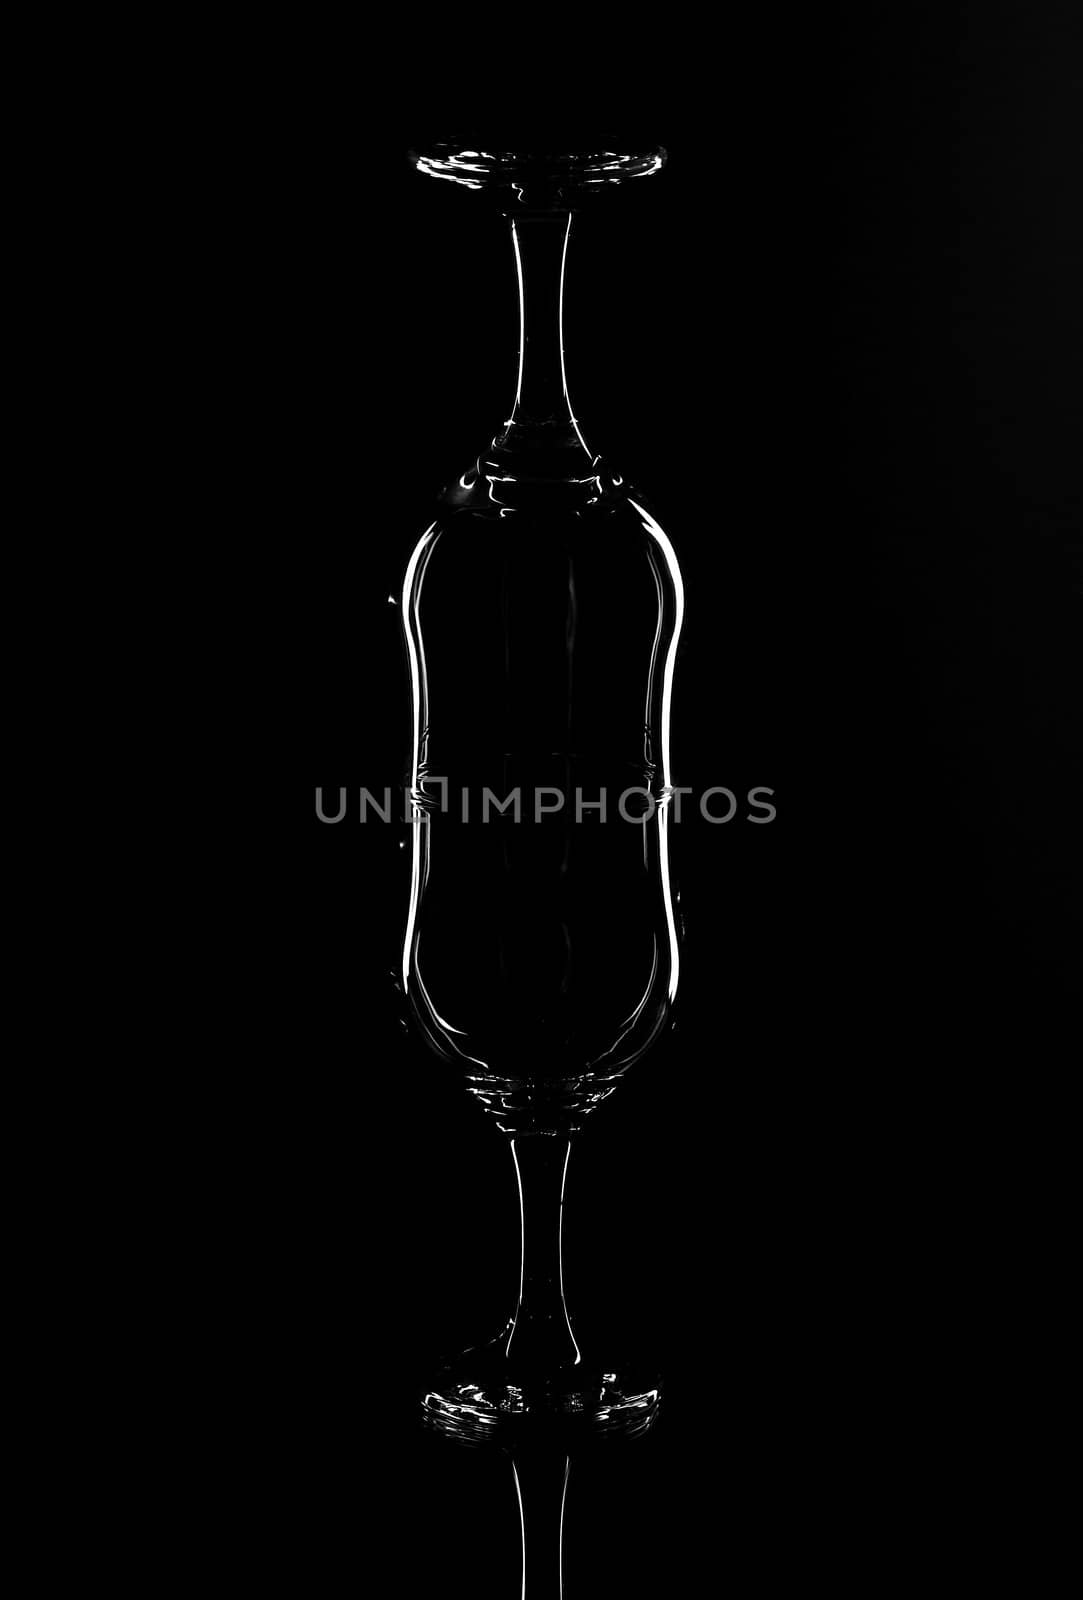 Wine glasses on a black background by selinsmo